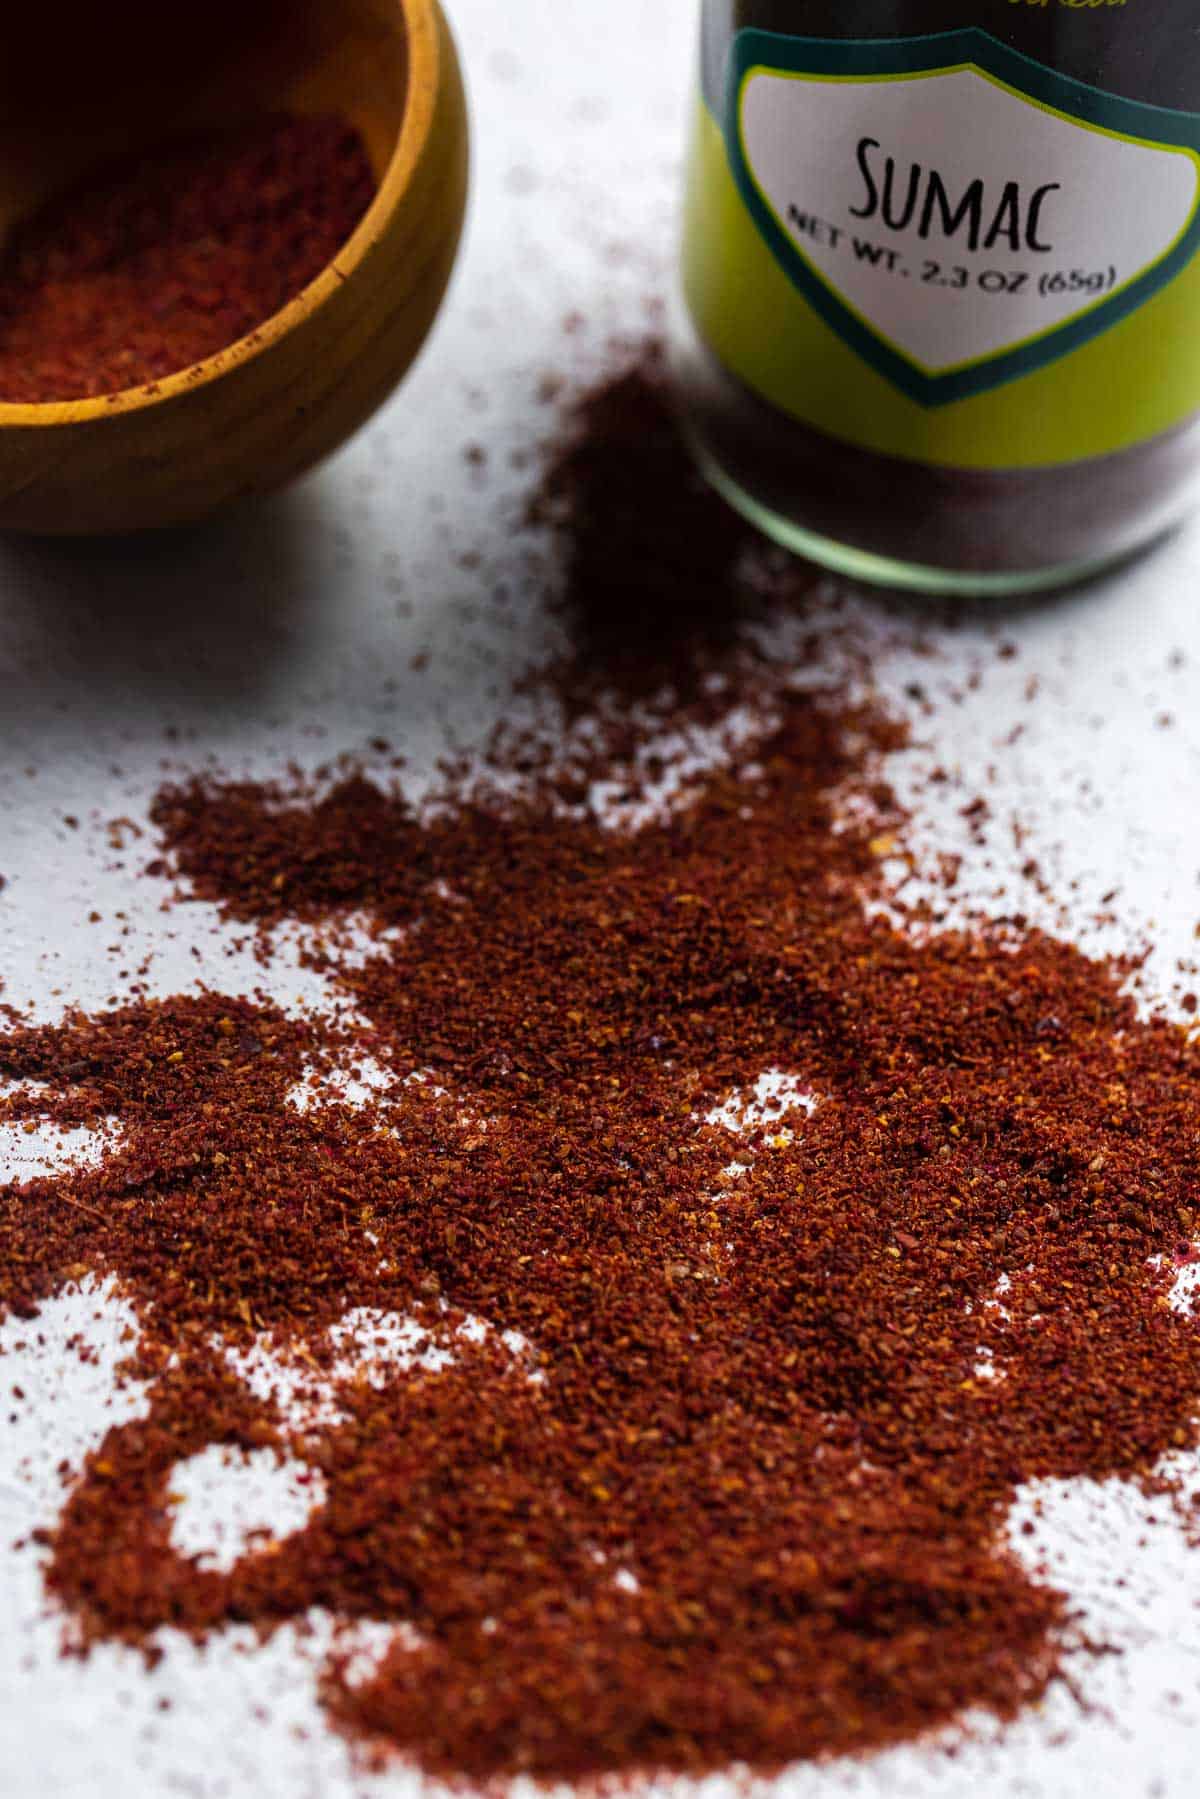 deep red sumac spice sprinkled onto a flat surface with a spoon full of the spice and a bottle of The Mediterranean Dish sumac in the background. 